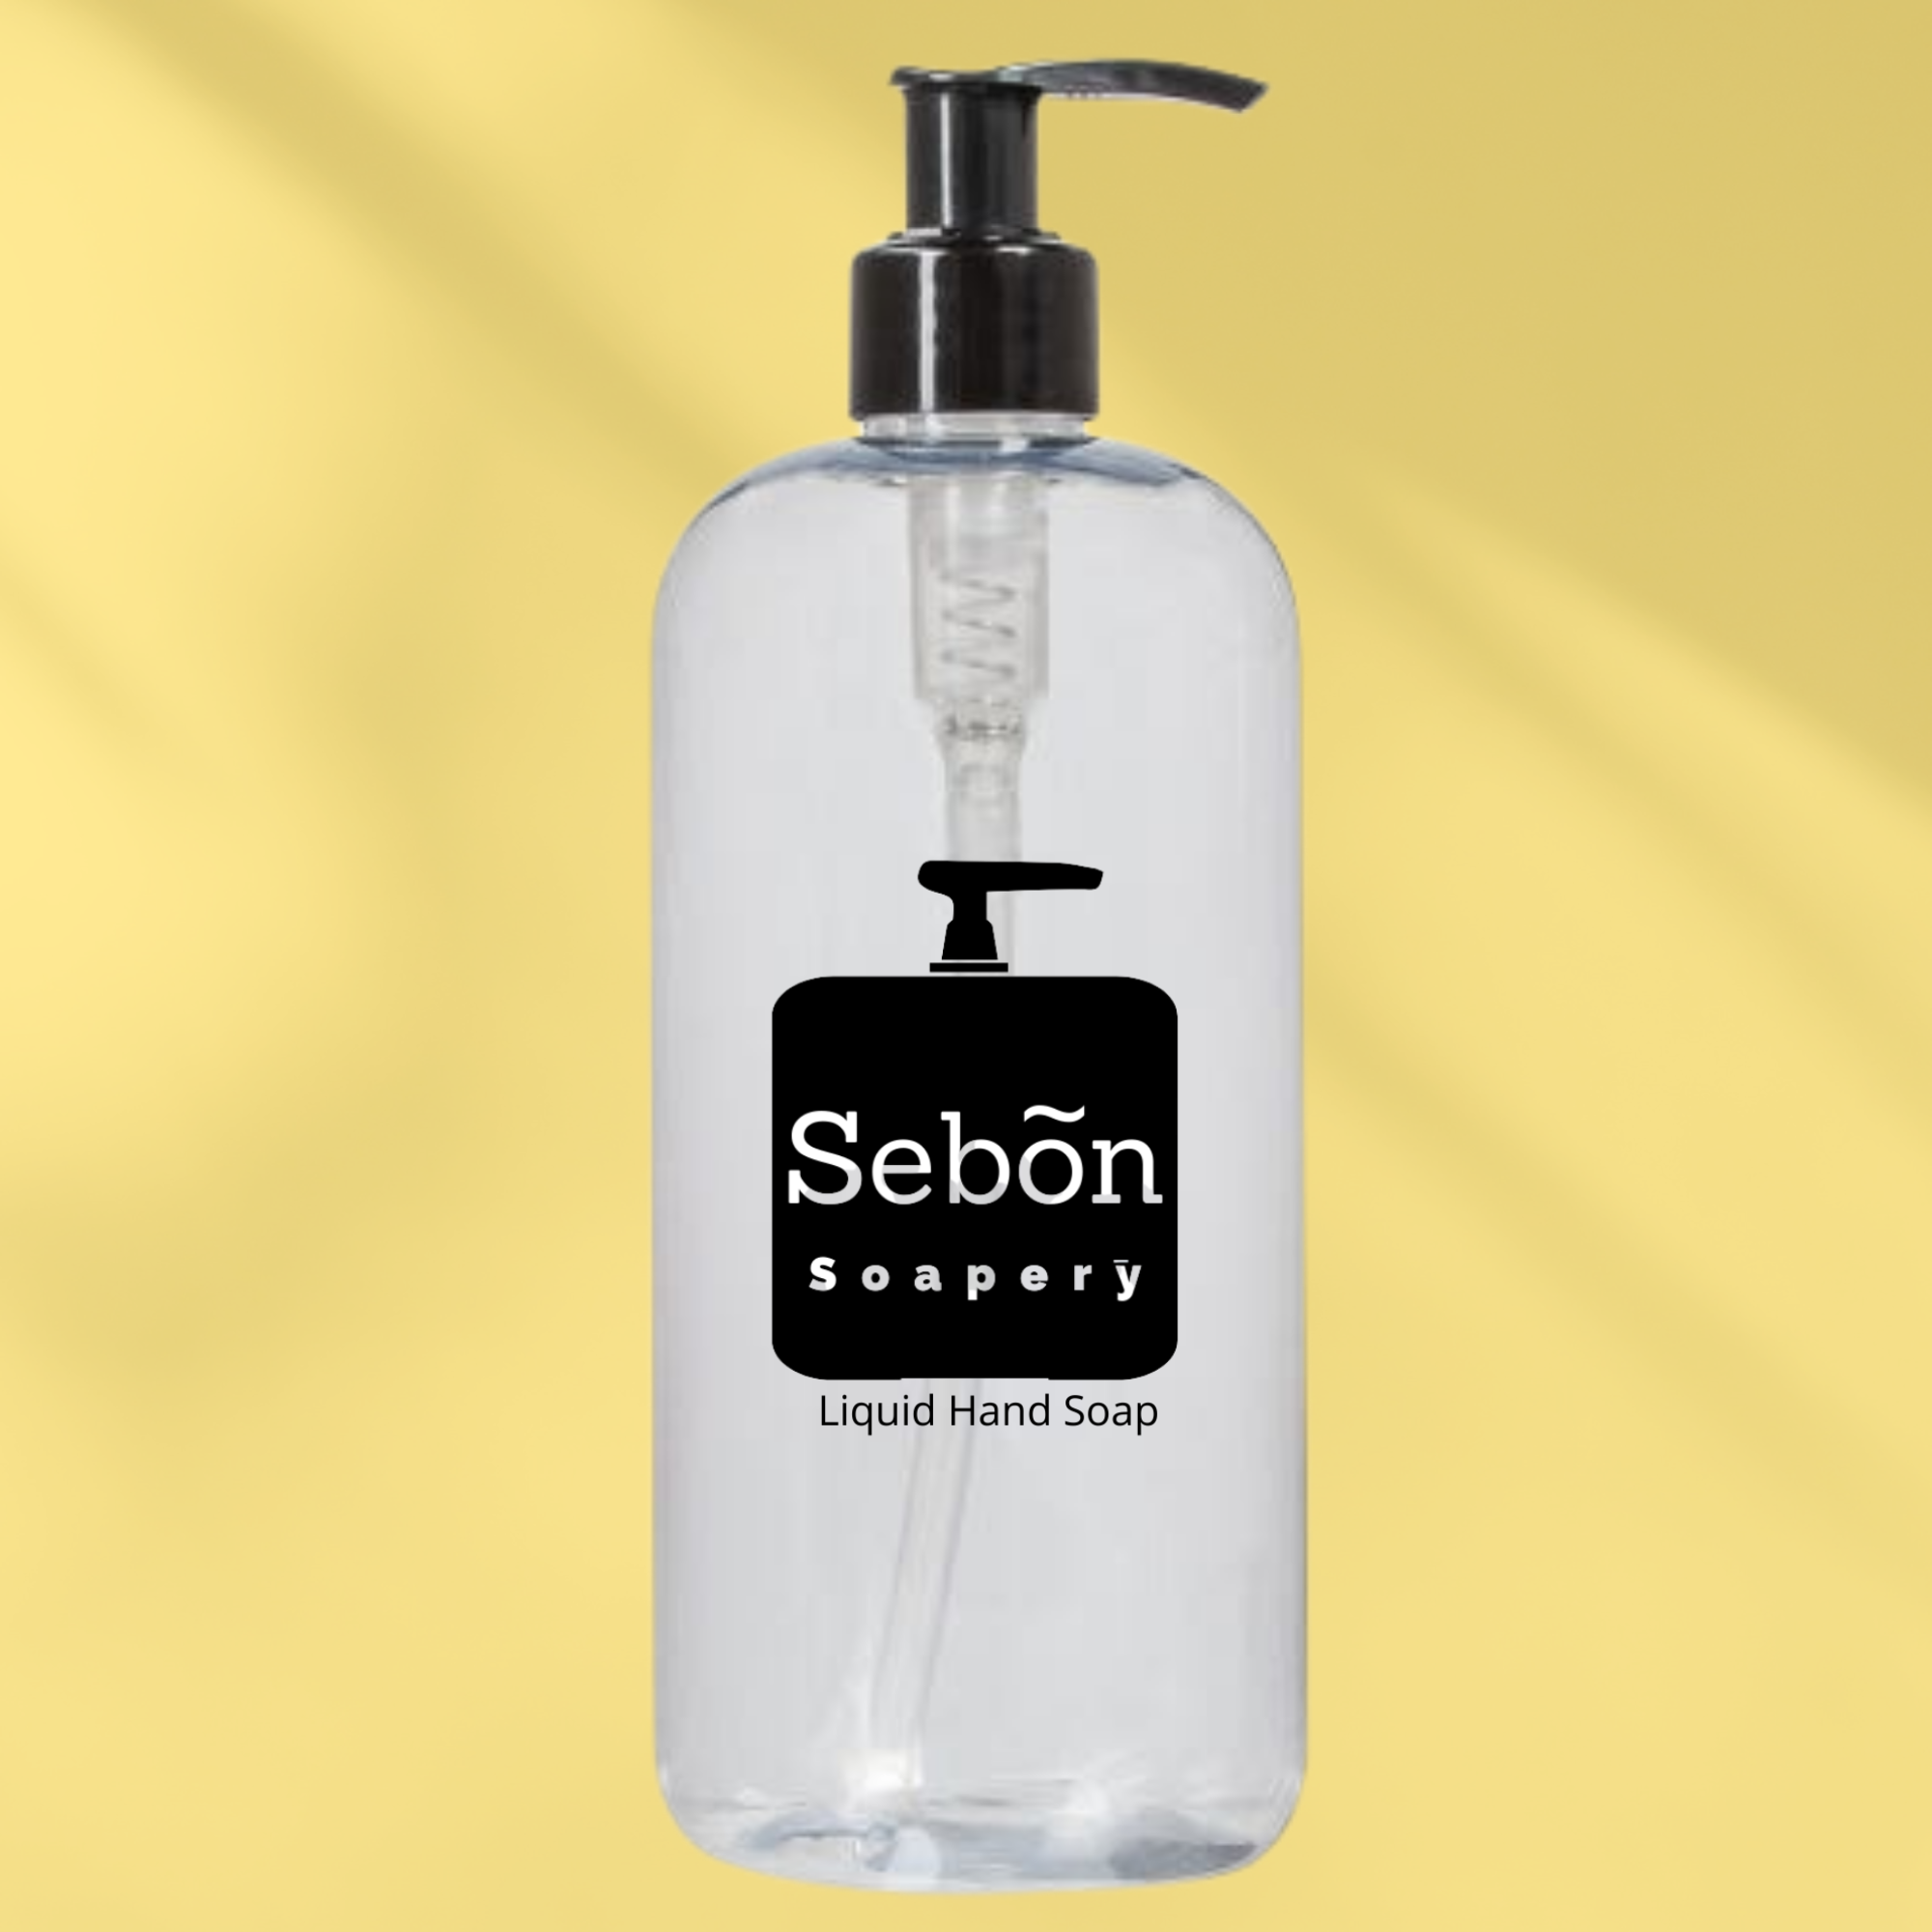 Sebon Amber Cherry & Sandalwood Scented Liquid Hand Soap with Olive Oil